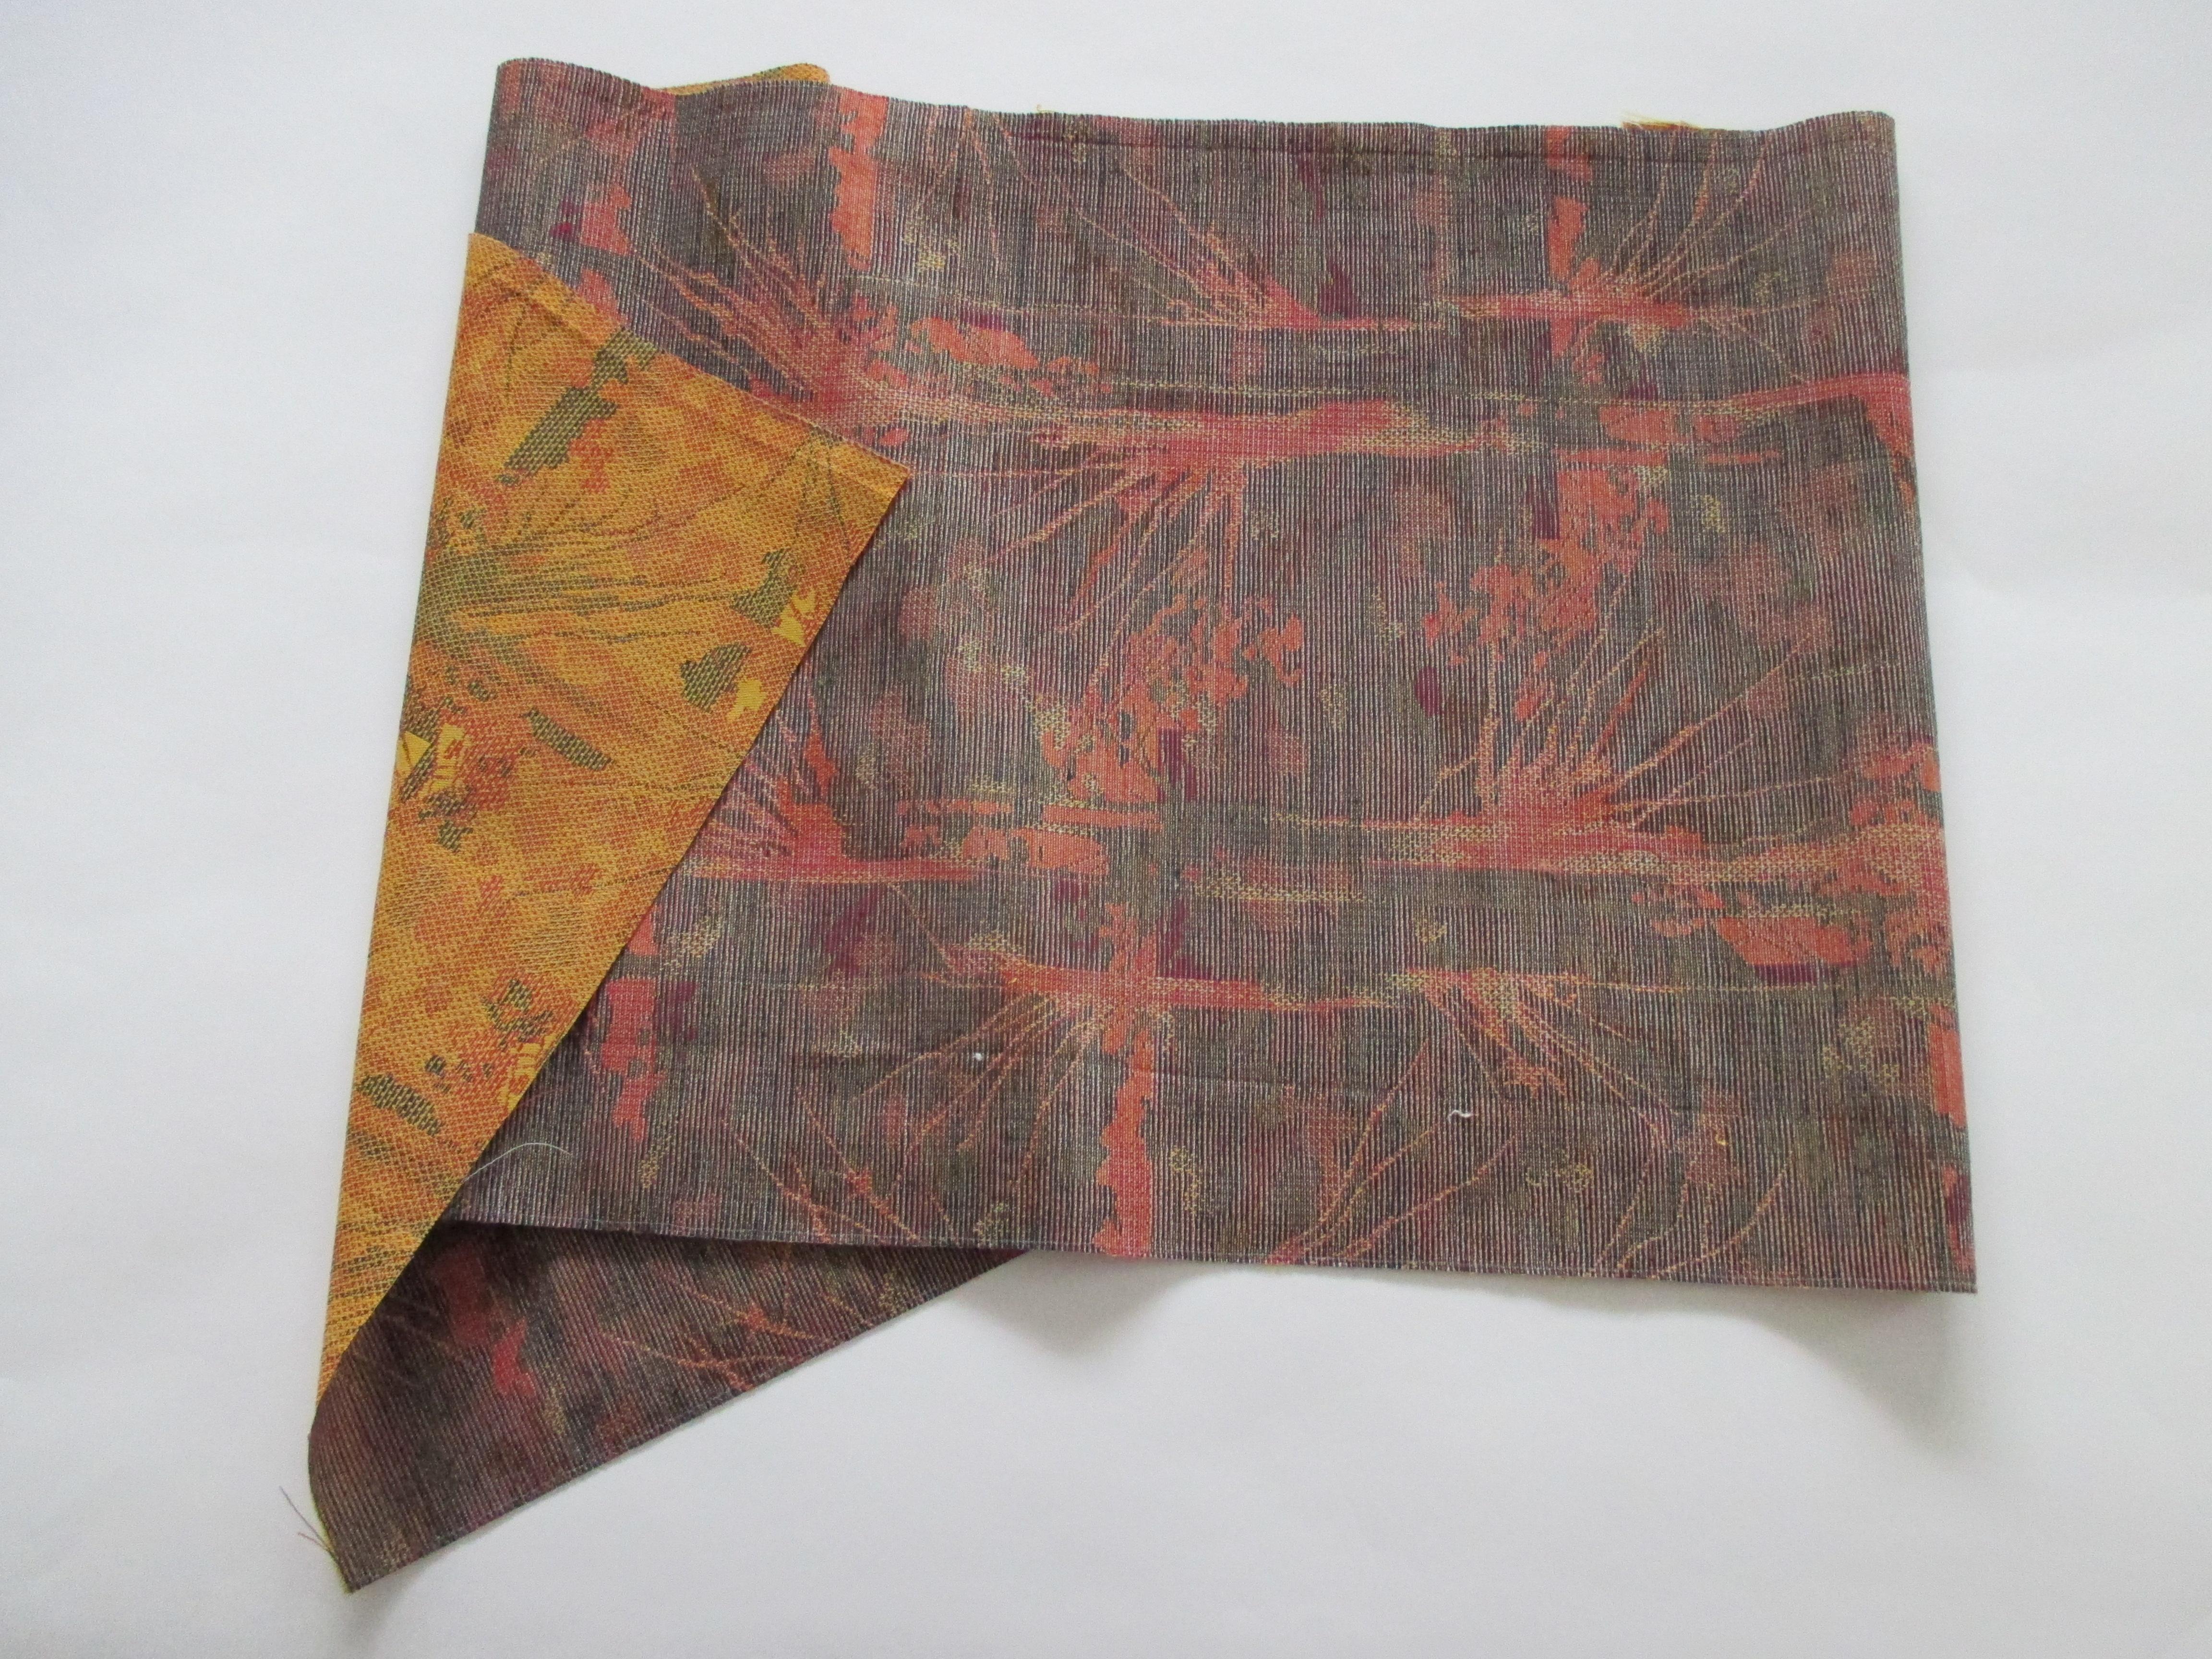 Vintage orange and green obi textile.
Ideal for pillows and upholstery.
Size: 14.5